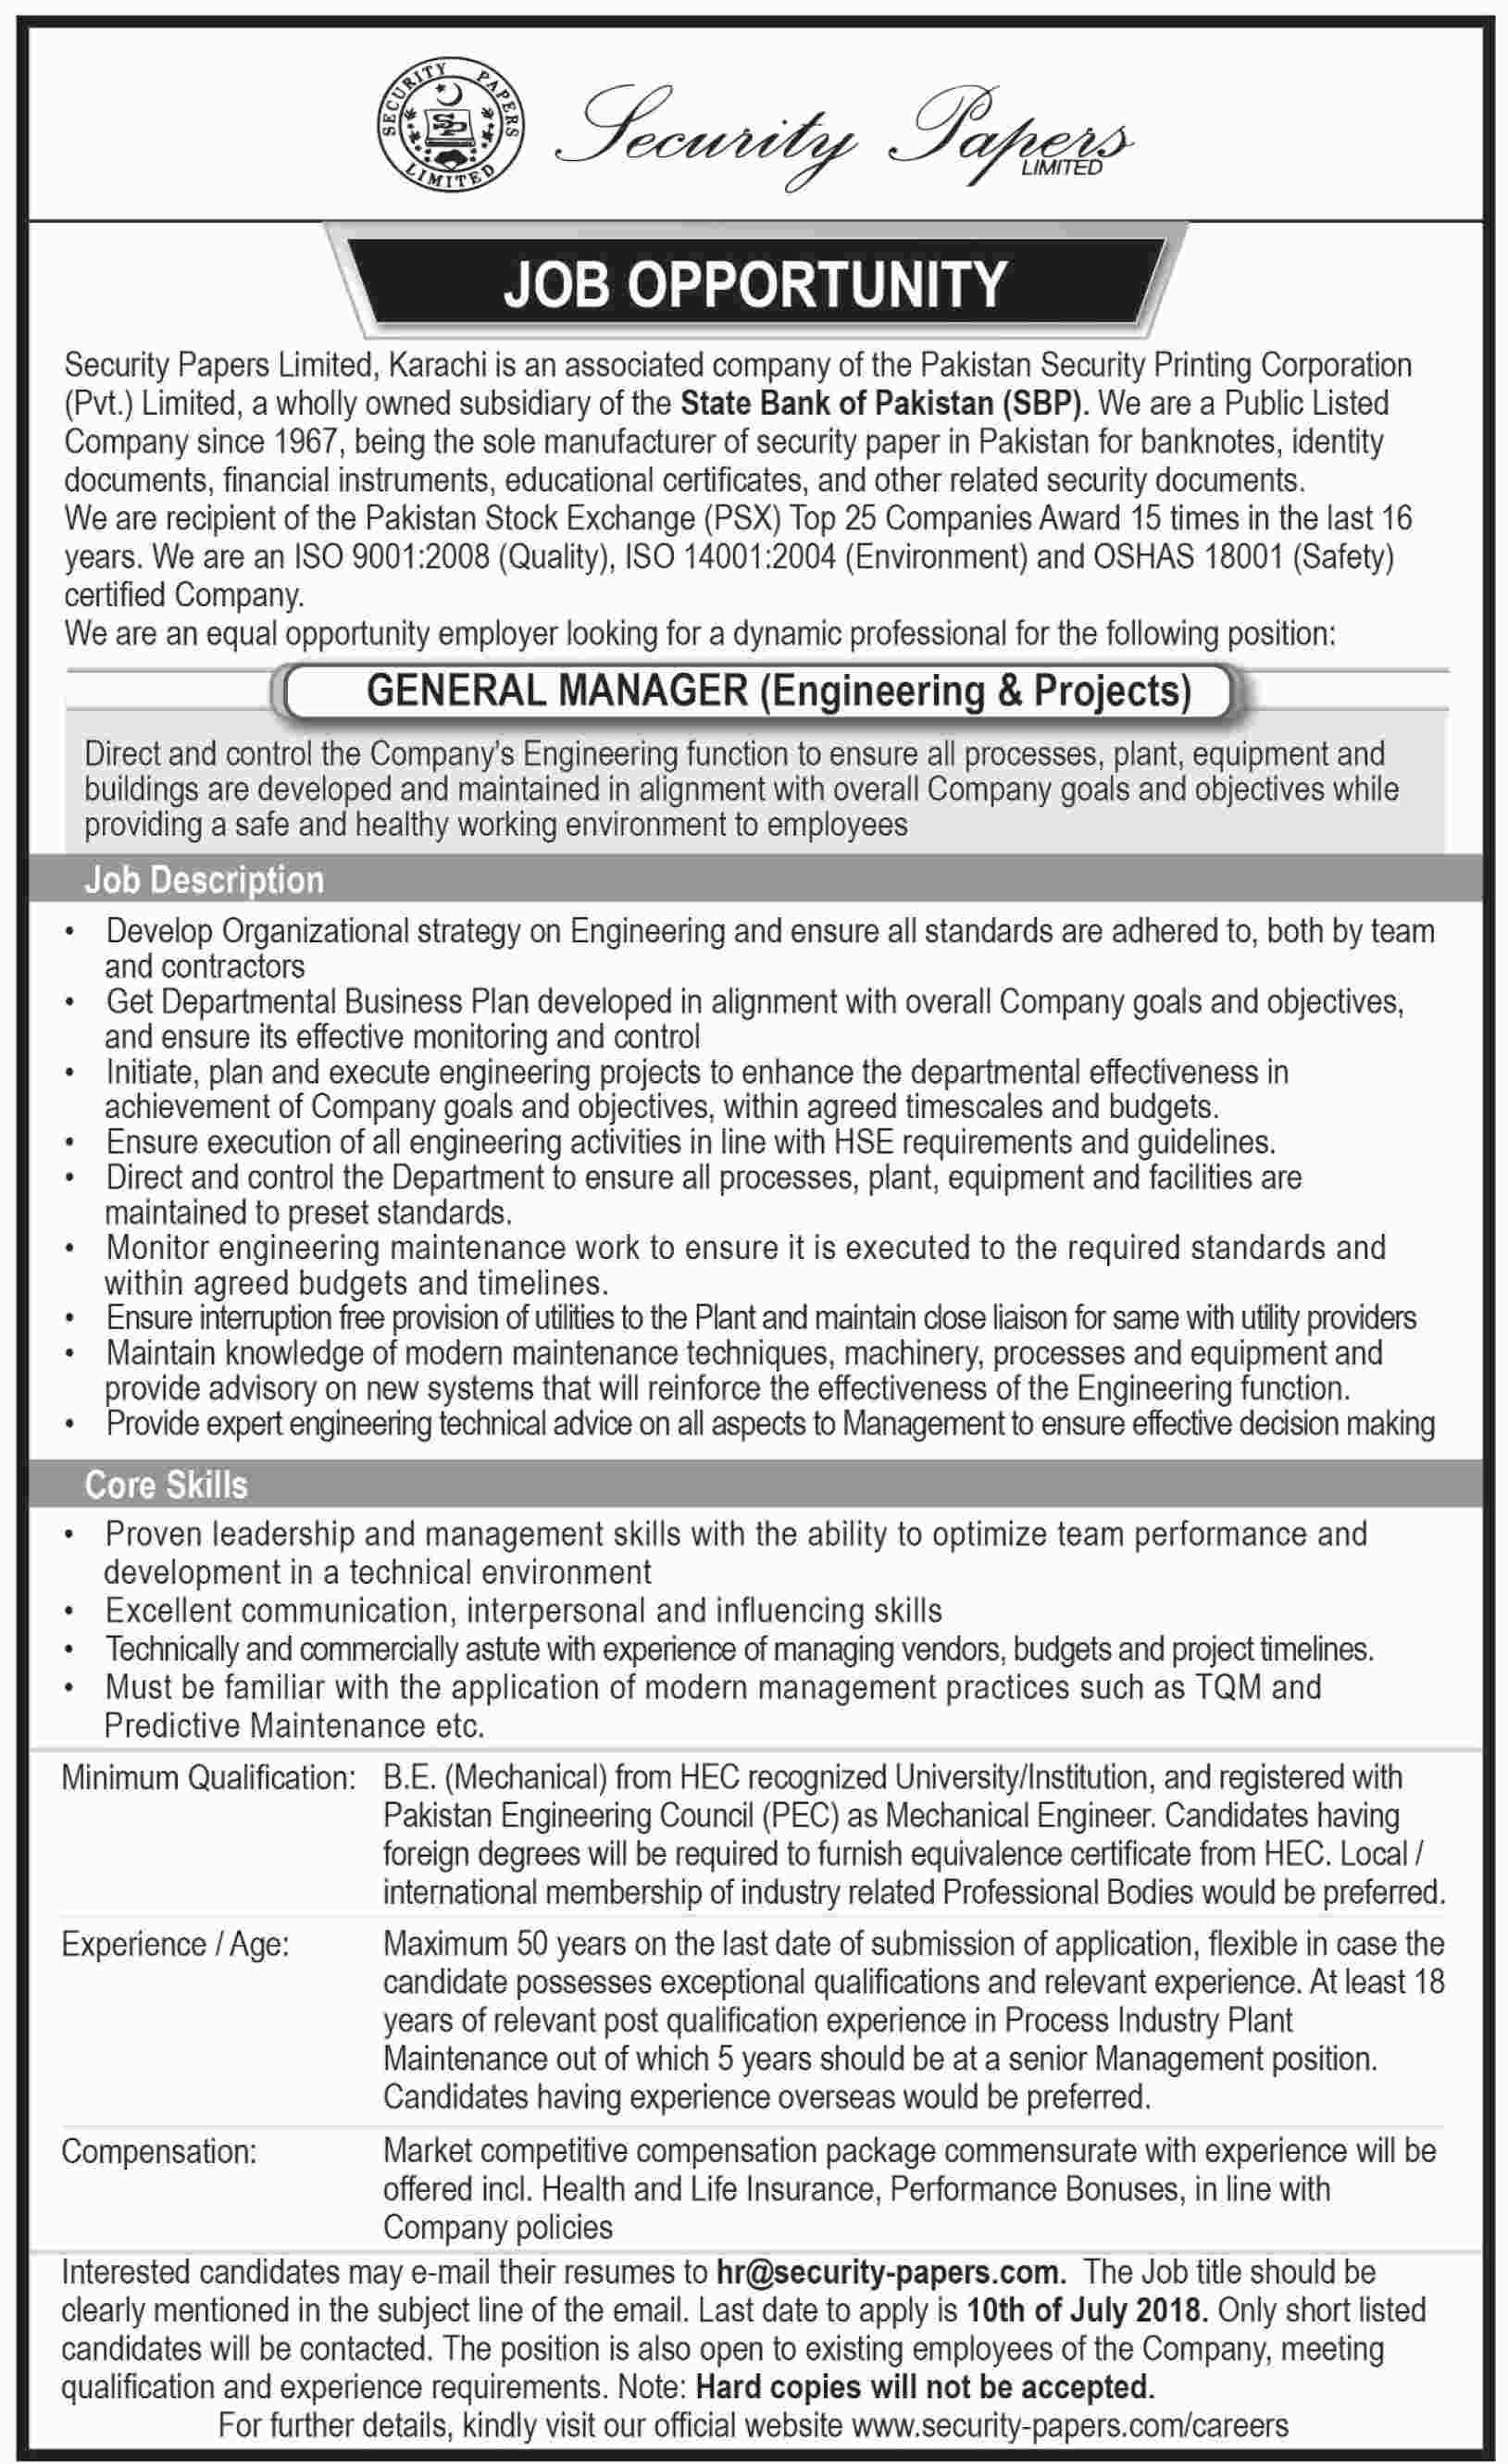 Jobs in Security Papers Limited 26 June 2018